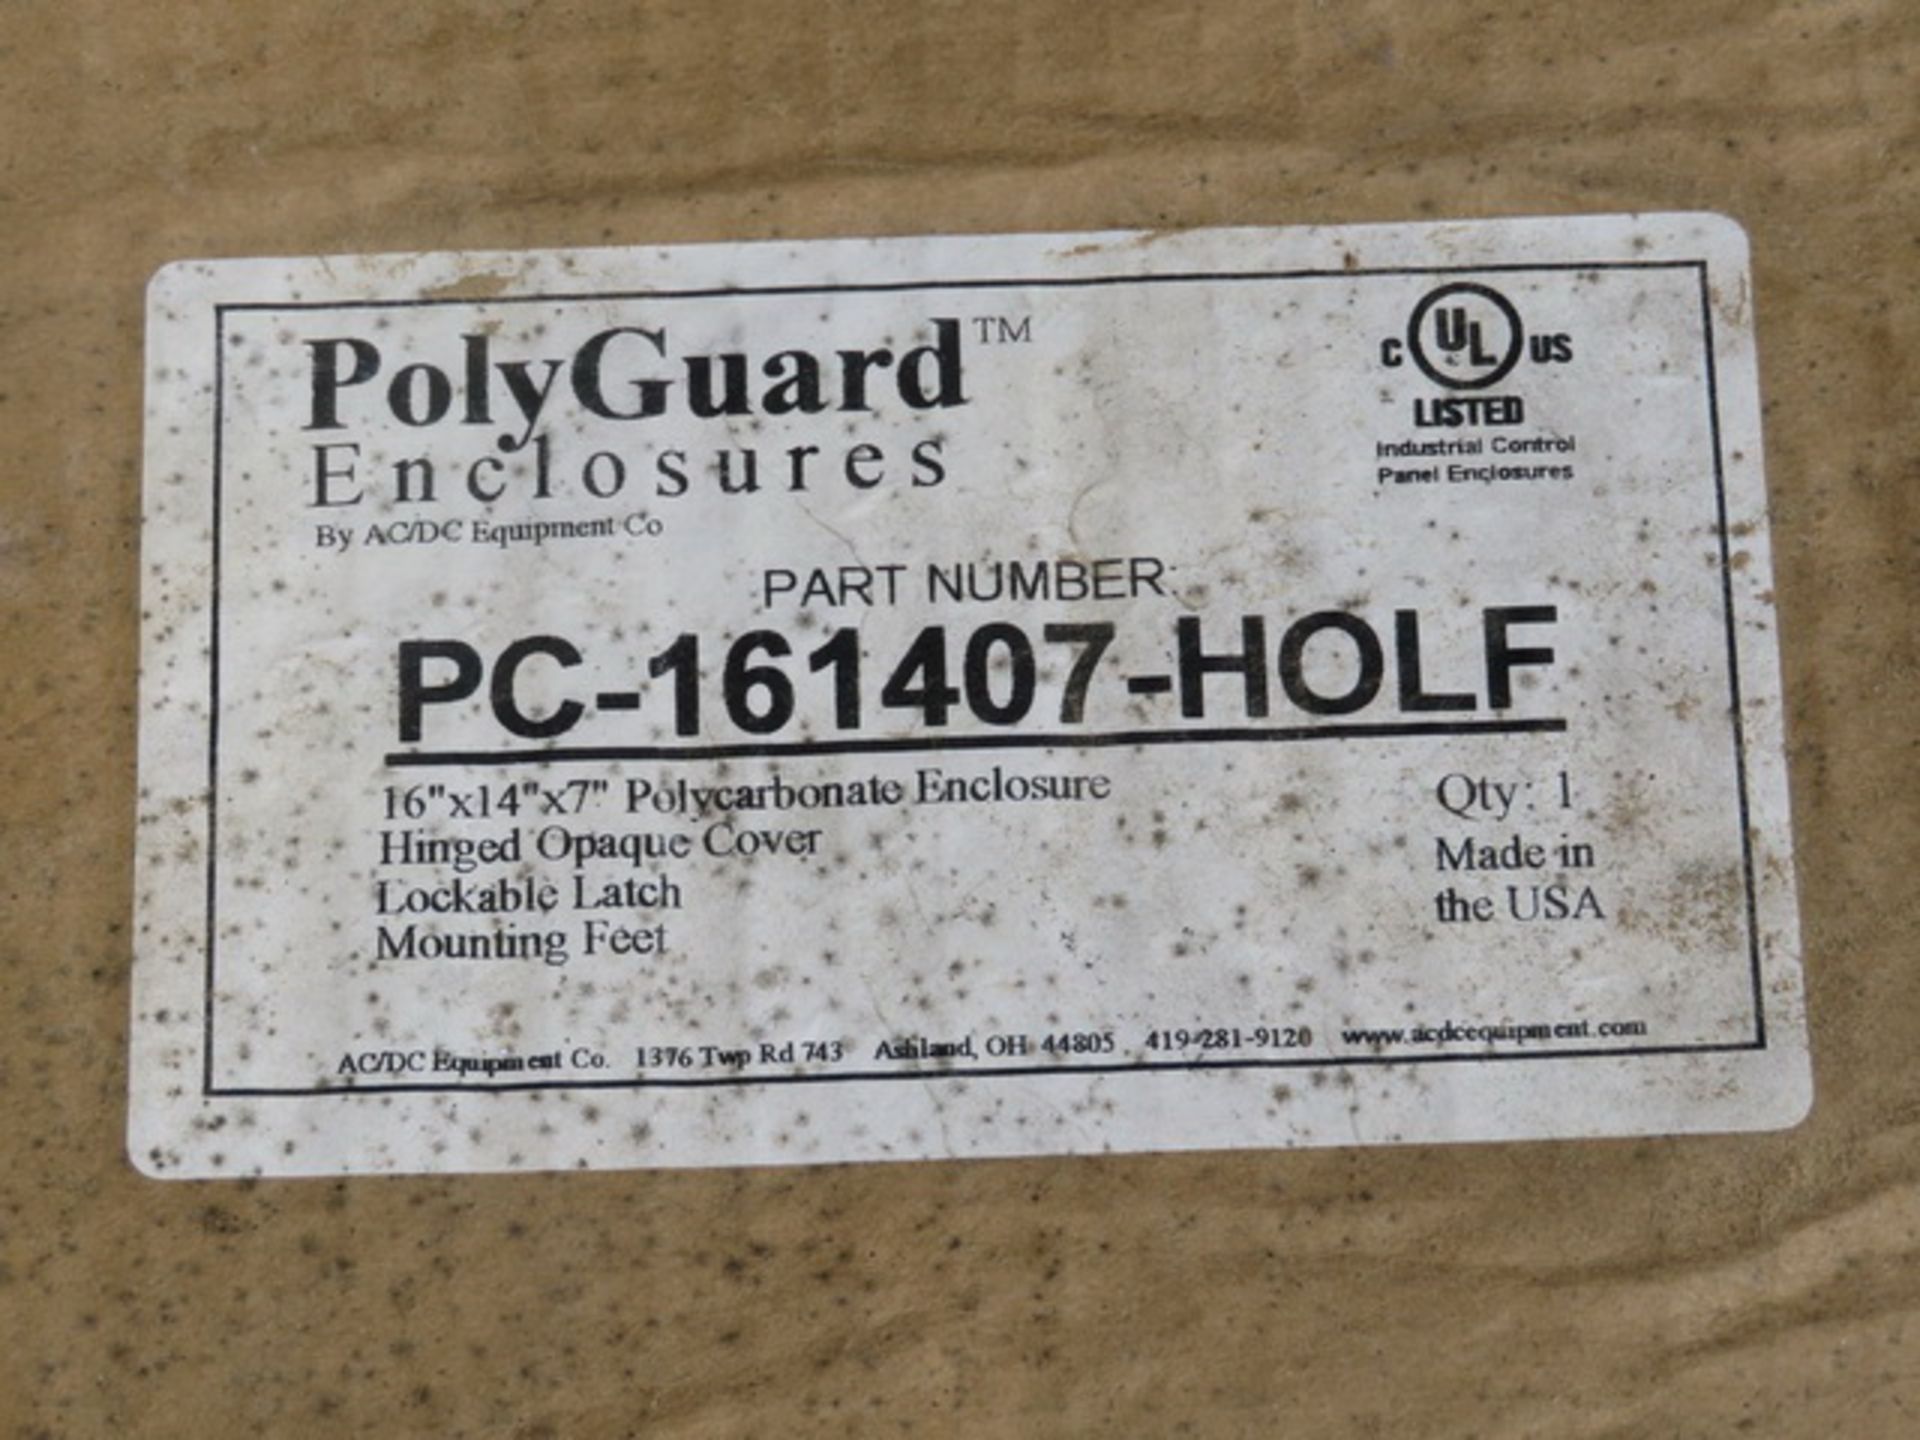 ACDC Equipment Co. PC-161407-HOLF Lot: Approx. (120) 16" x 14" x 7" Polycarbonate Enclosures. - Image 4 of 9